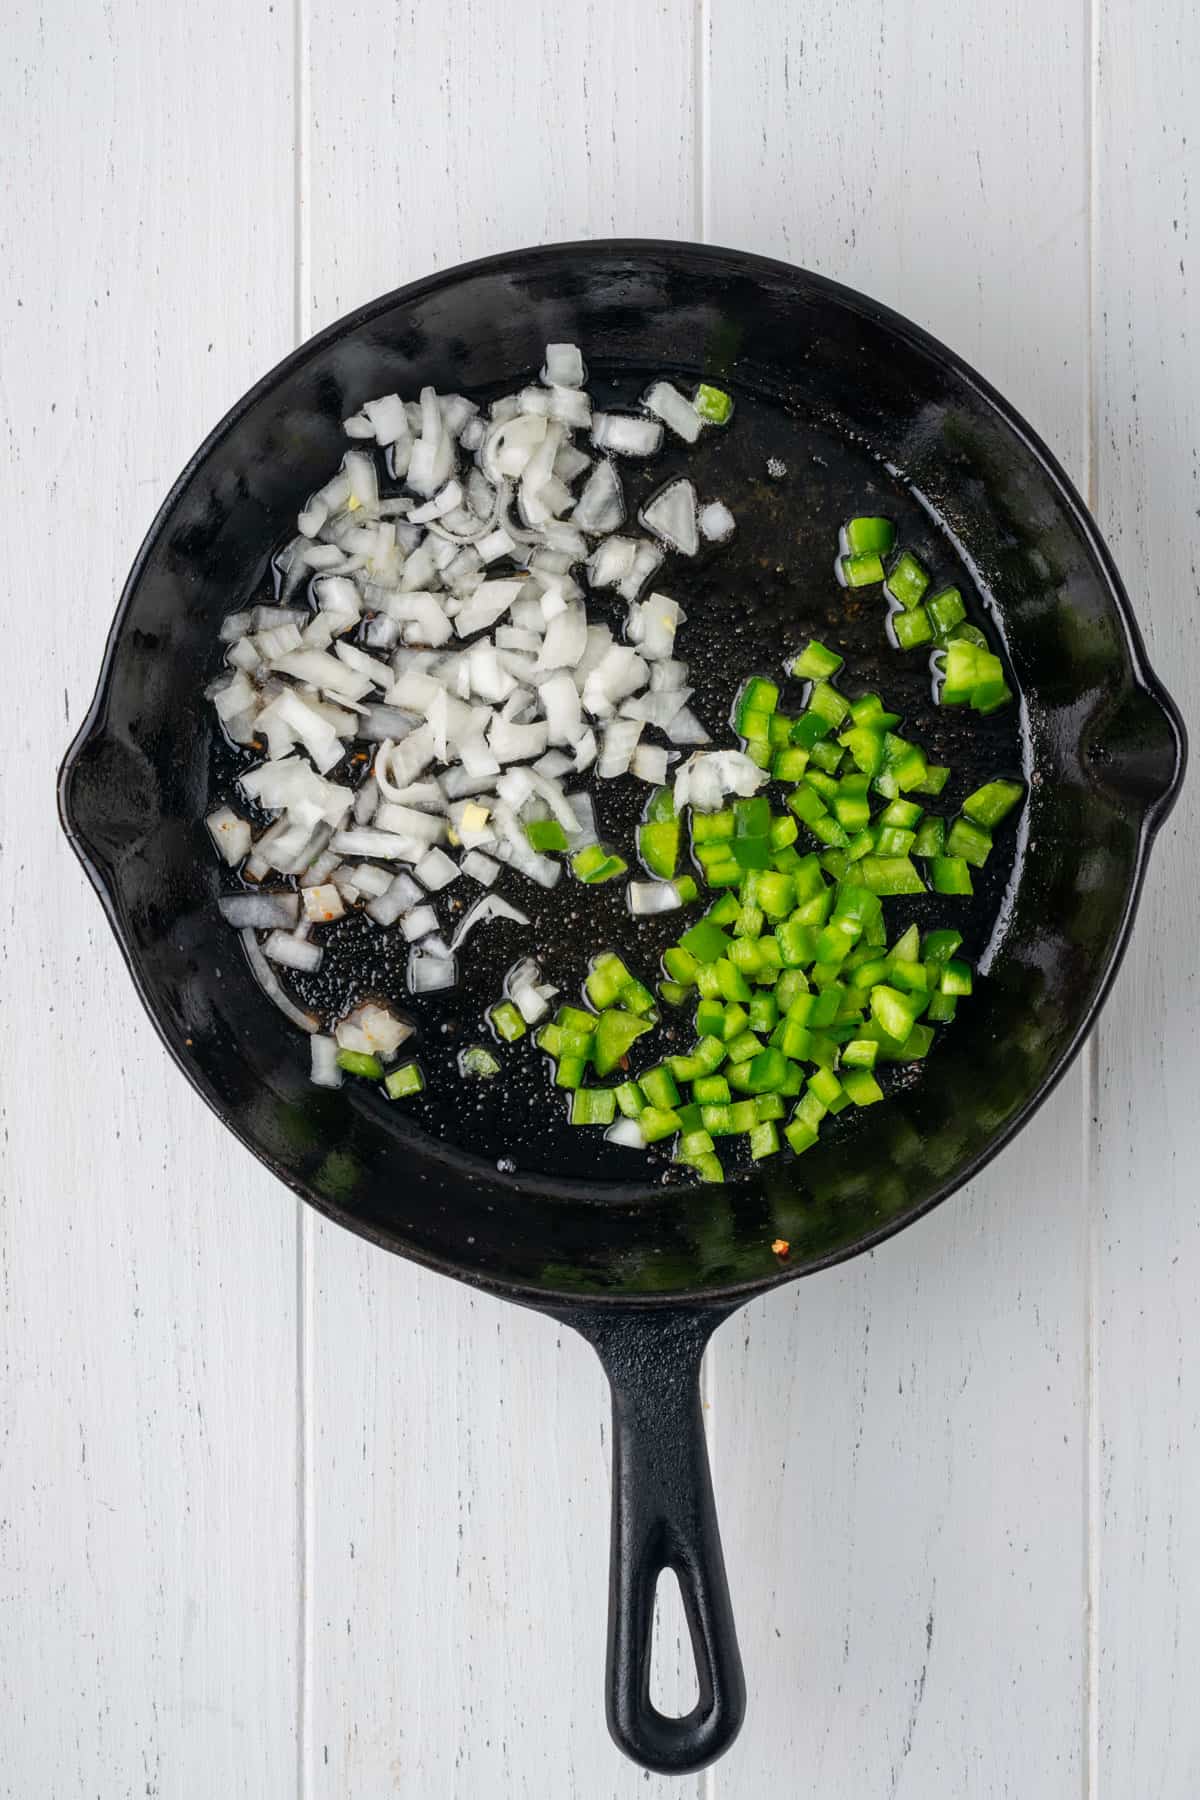 Onions and green peppers being cooked in bacon grease in a cast iron skillet.